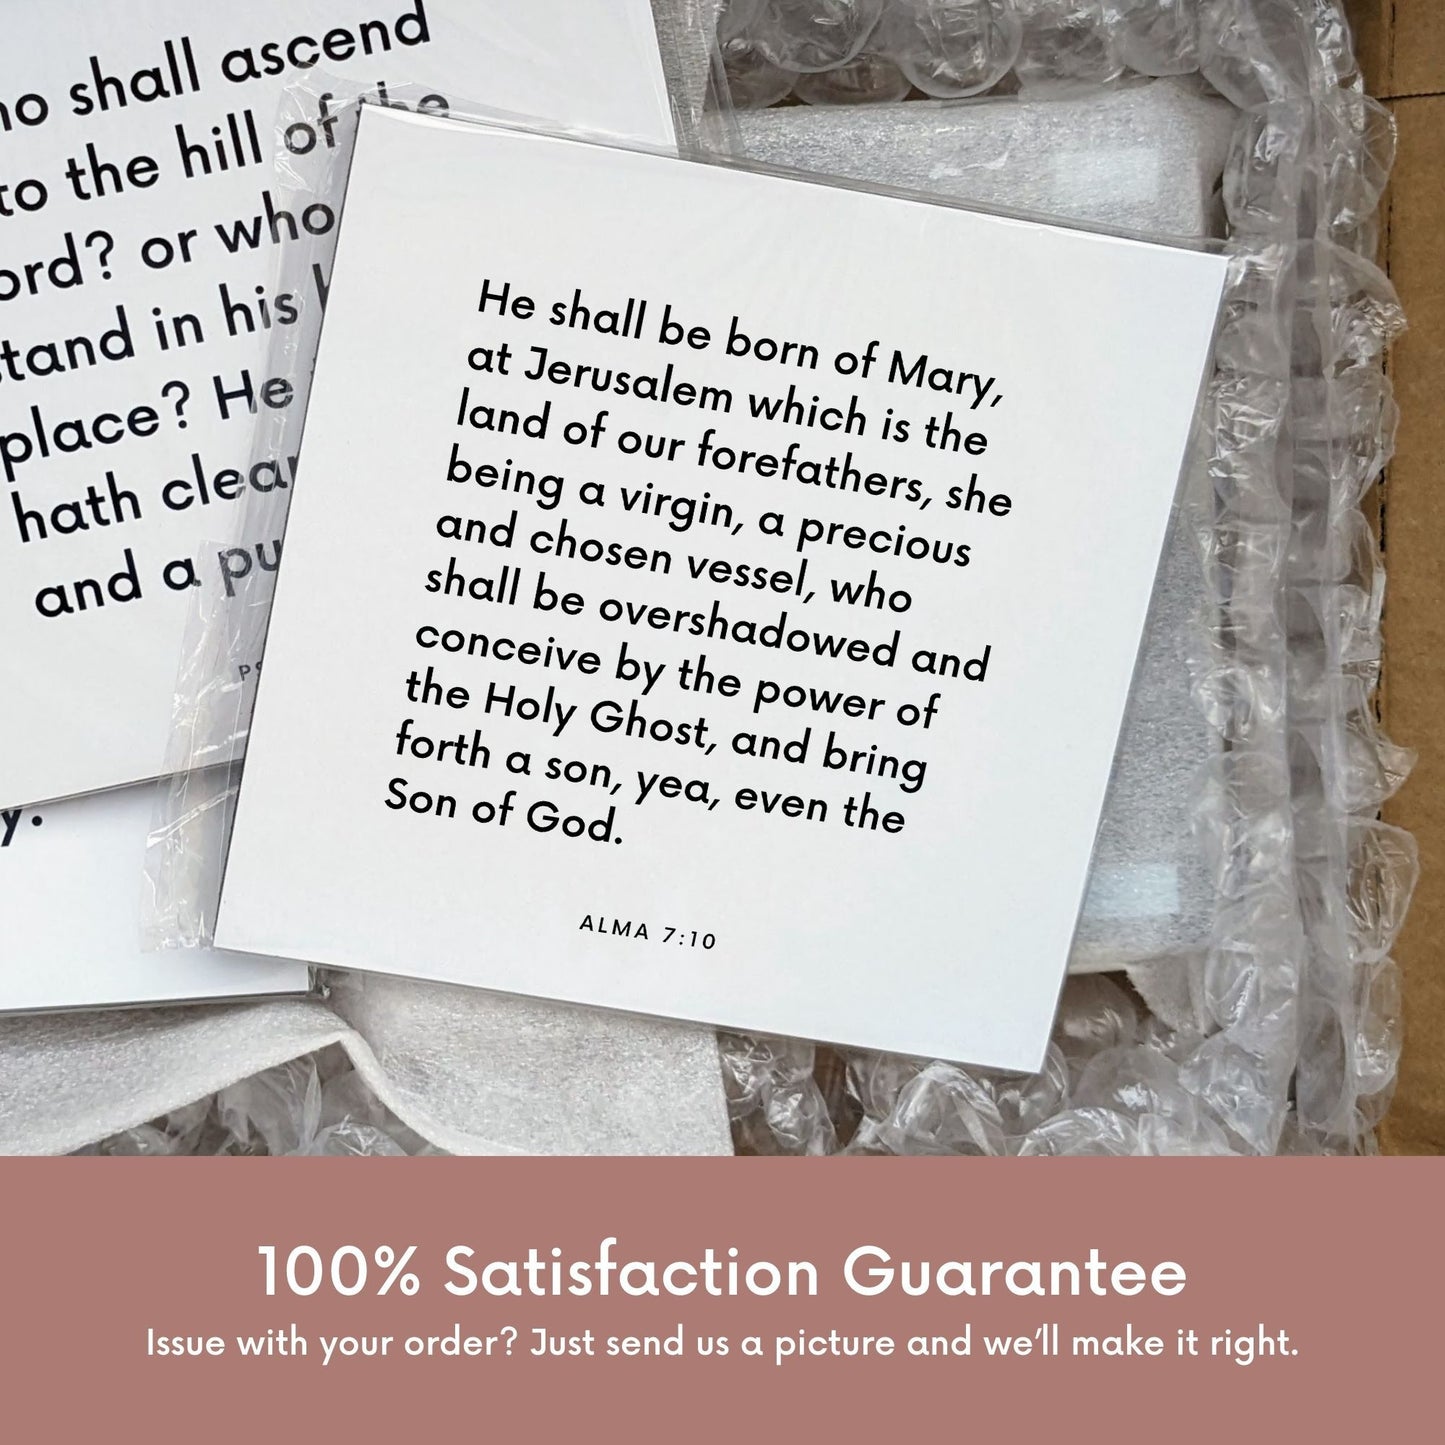 Shipping materials for scripture tile of Alma 7:10 - "He shall be born of Mary, a precious and chosen vessel"